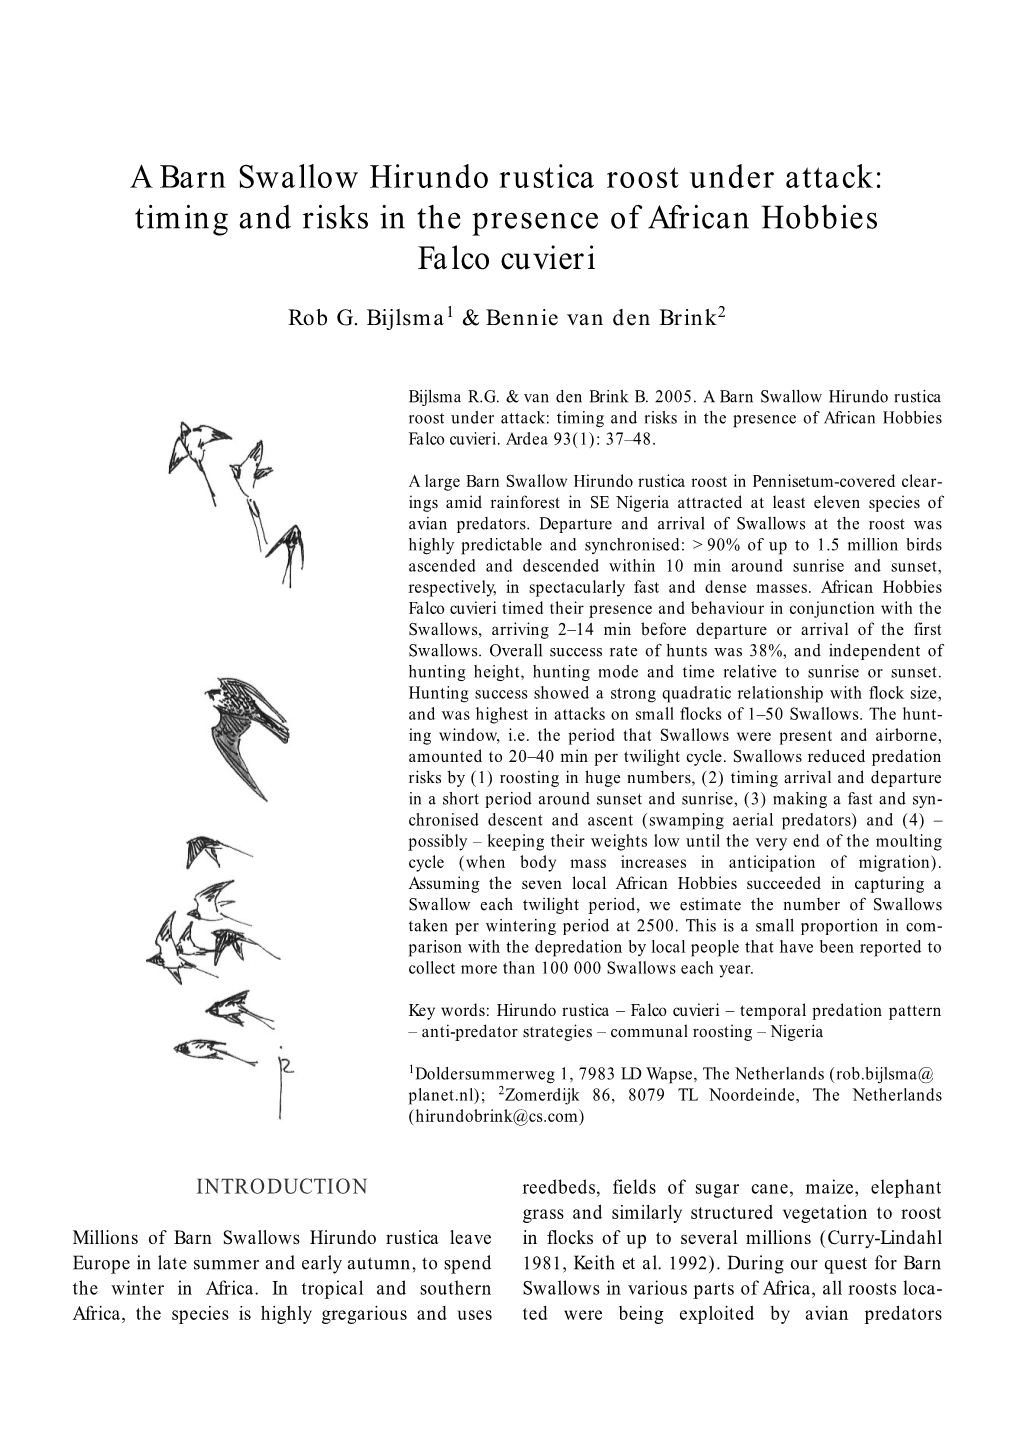 A Barn Swallow Hirundo Rustica Roost Under Attack: Timing and Risks in the Presence of African Hobbies Falco Cuvieri